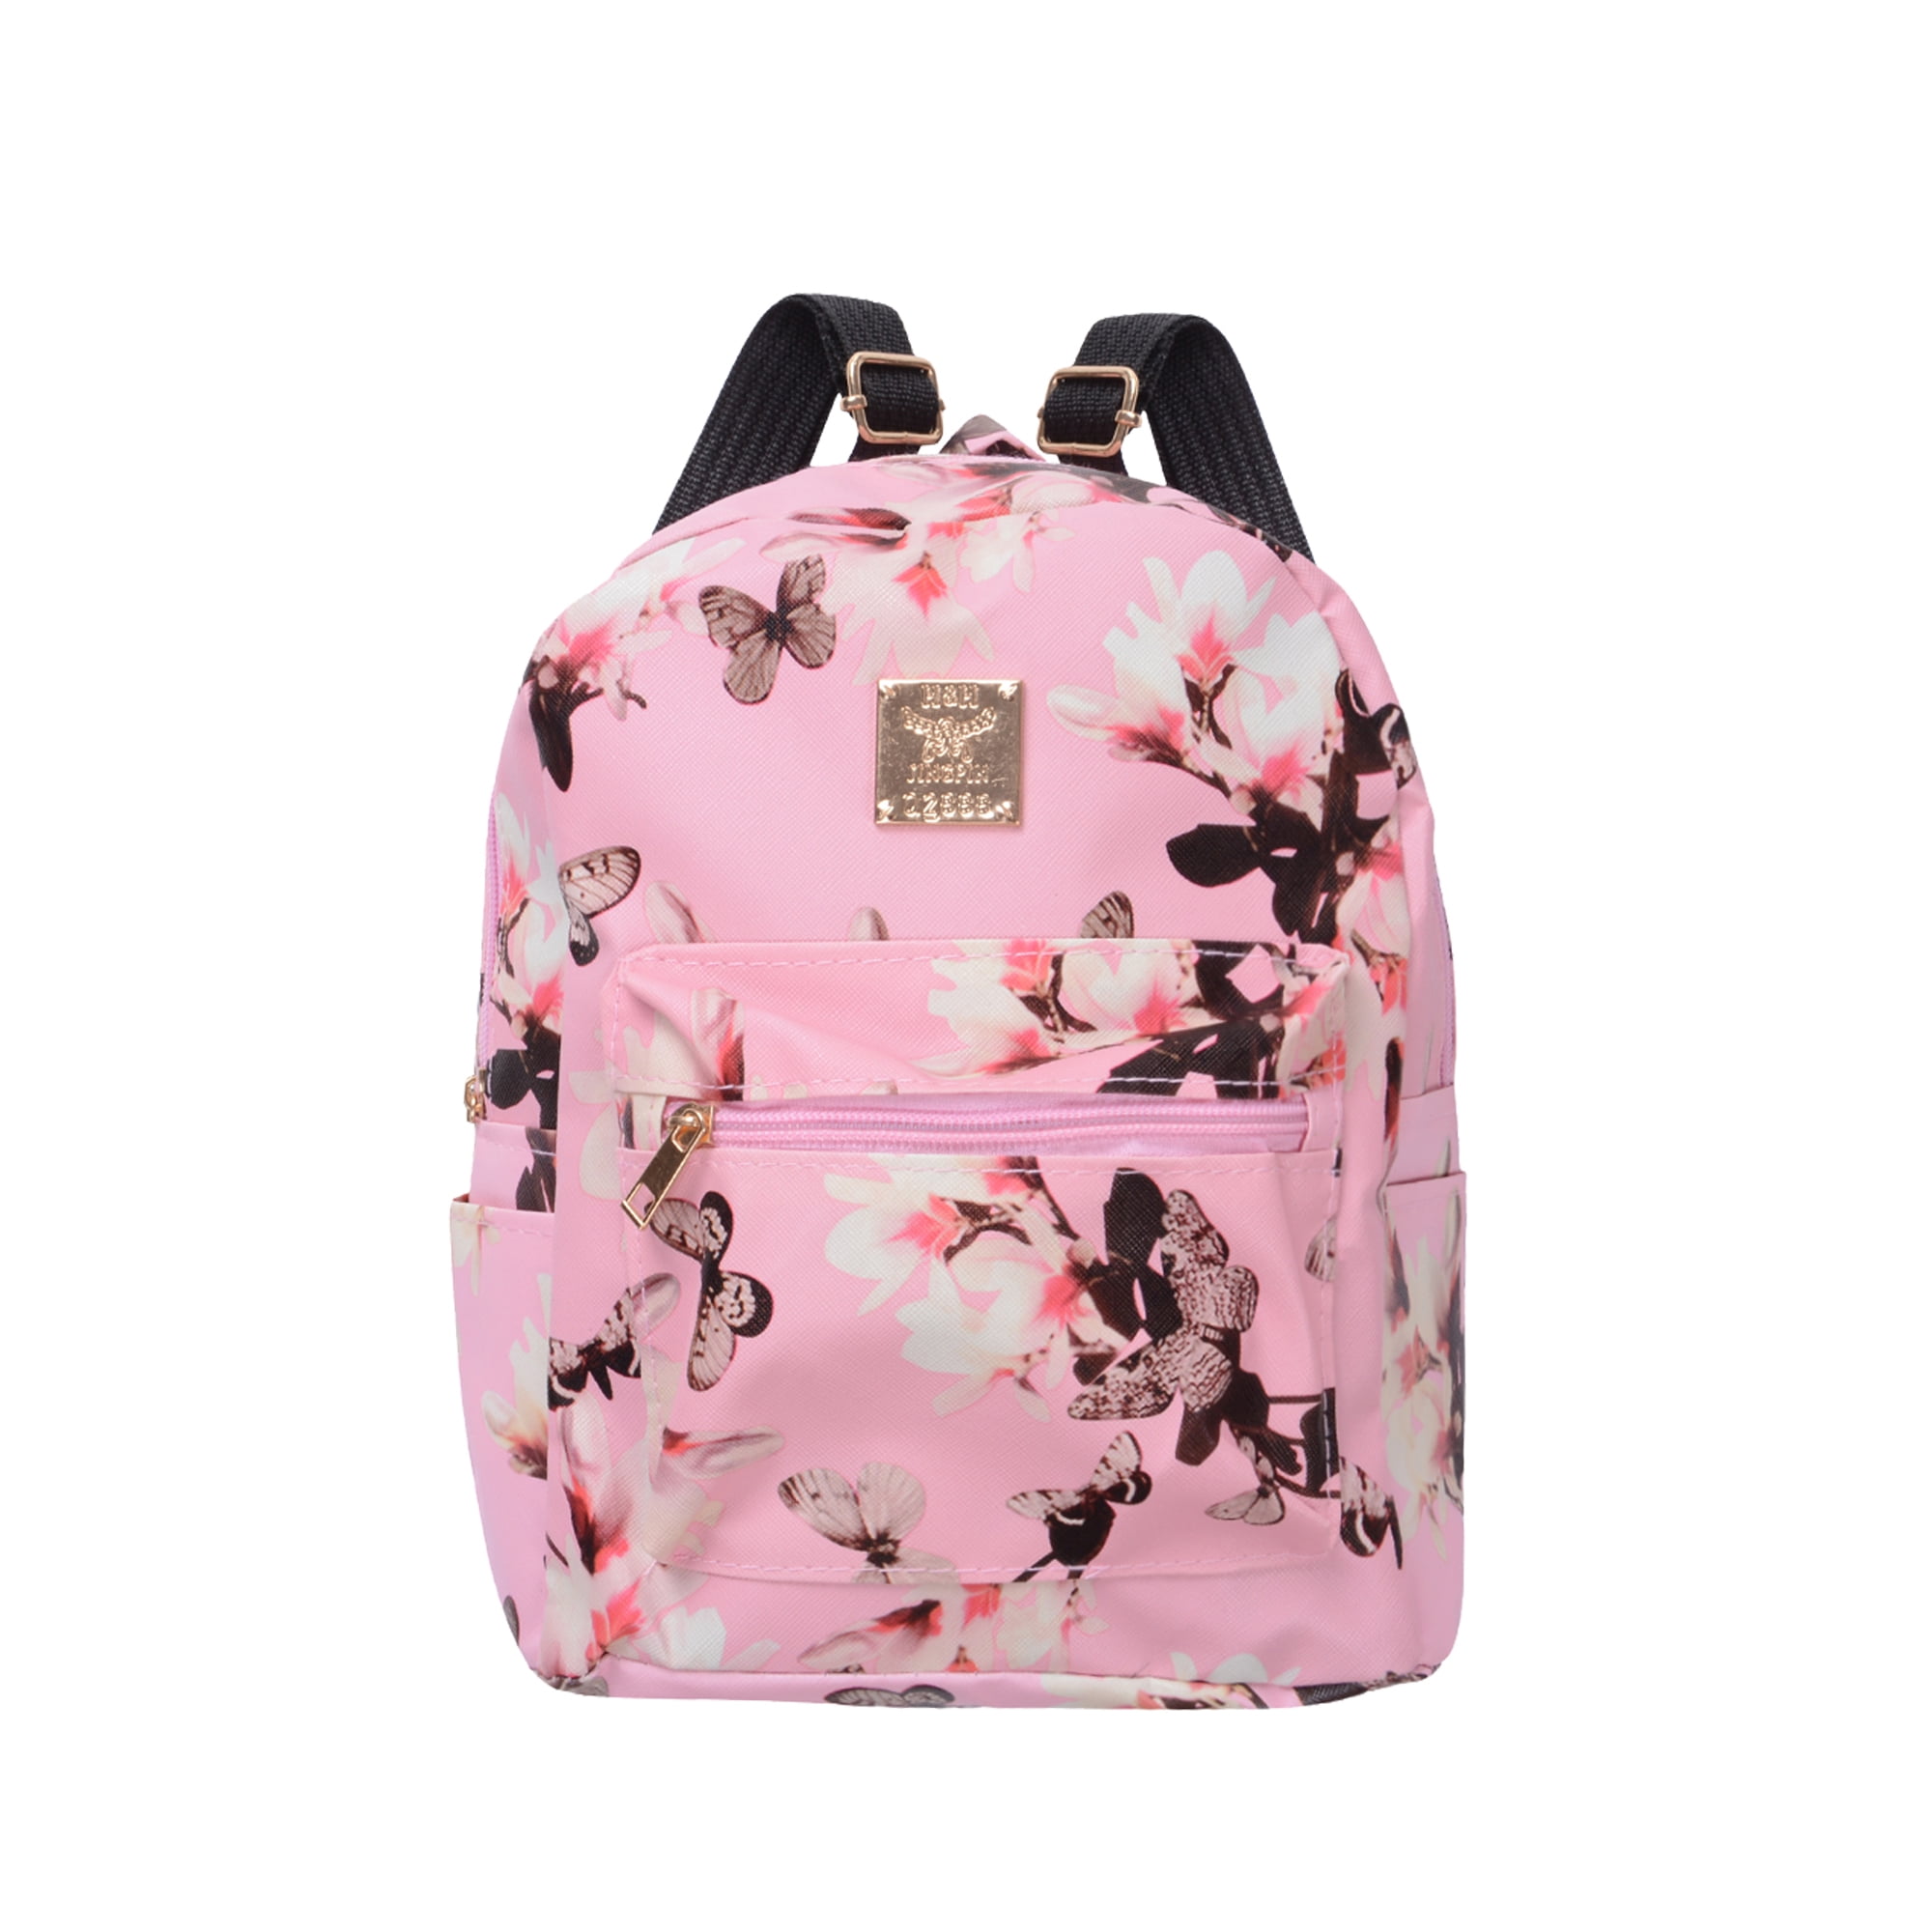 Woman Backpack Topical Eaves And Flowers Shoulder Bag Daypack for Girls School Bag